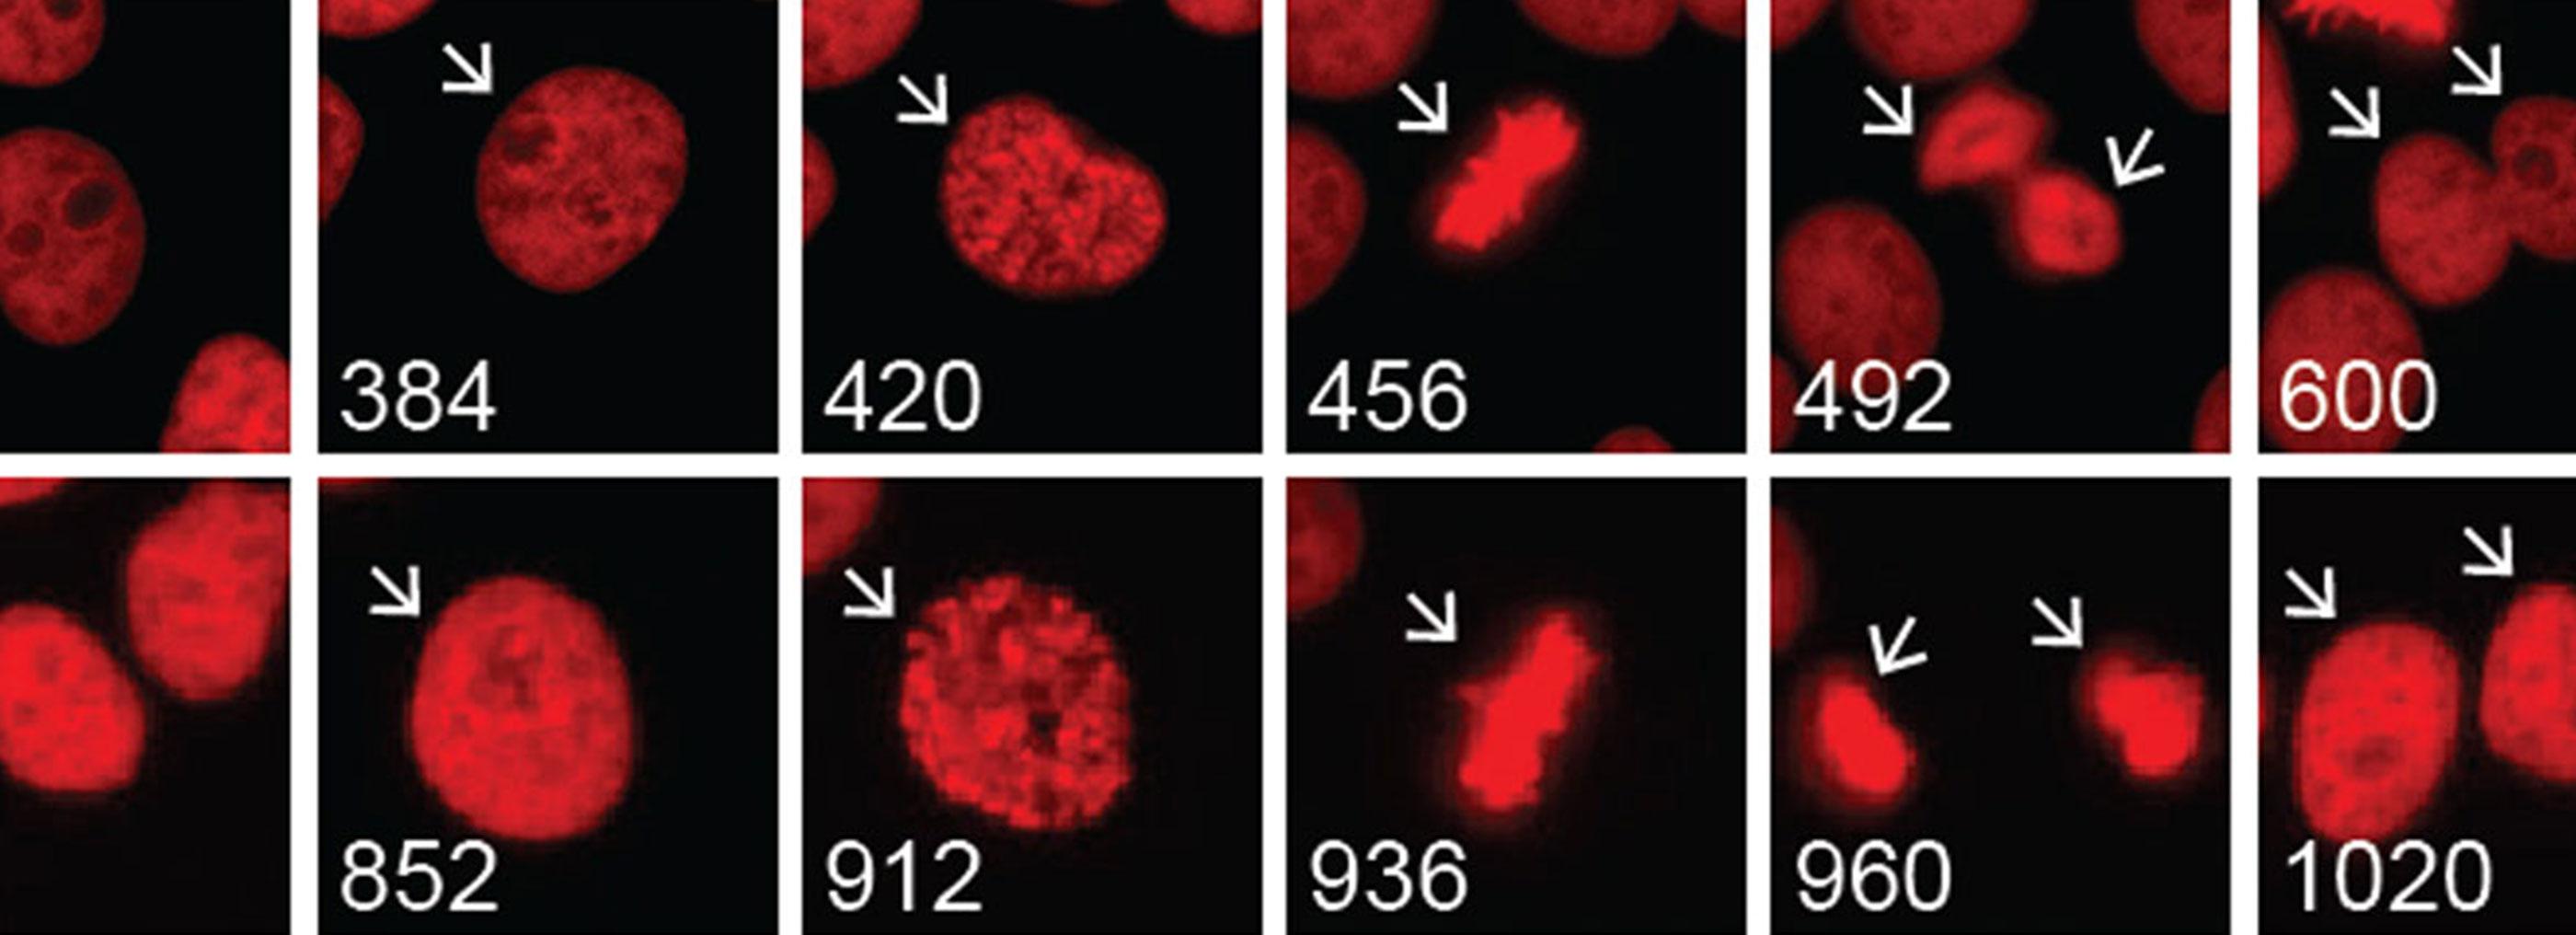 Microscopy images showing cell cycle progression for cells treated with various drugs